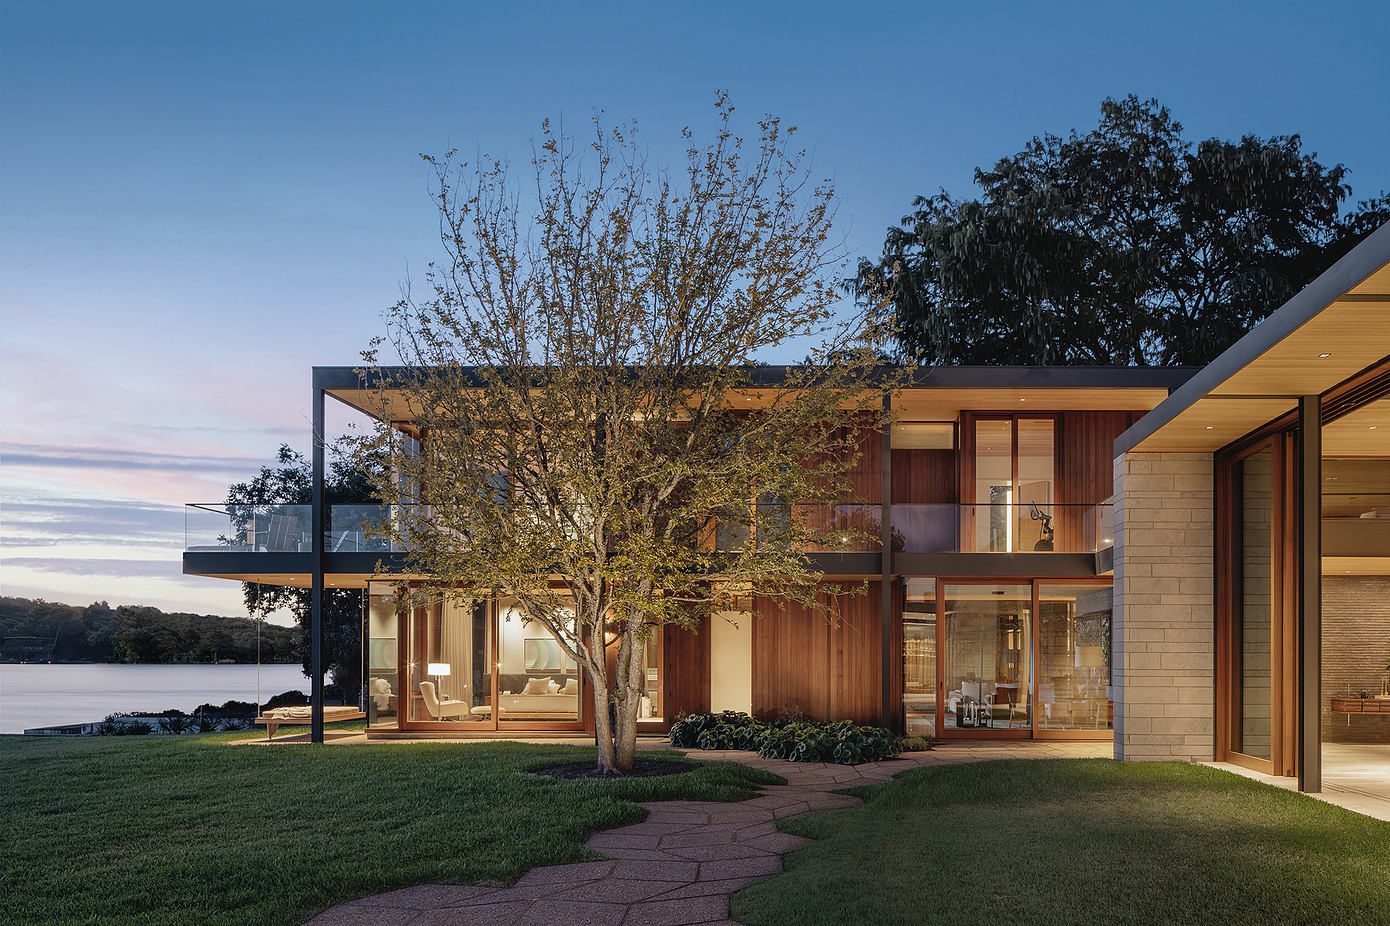 Water’s Edge Residence: Sustainable Design in Hot, Humid Texas Climate